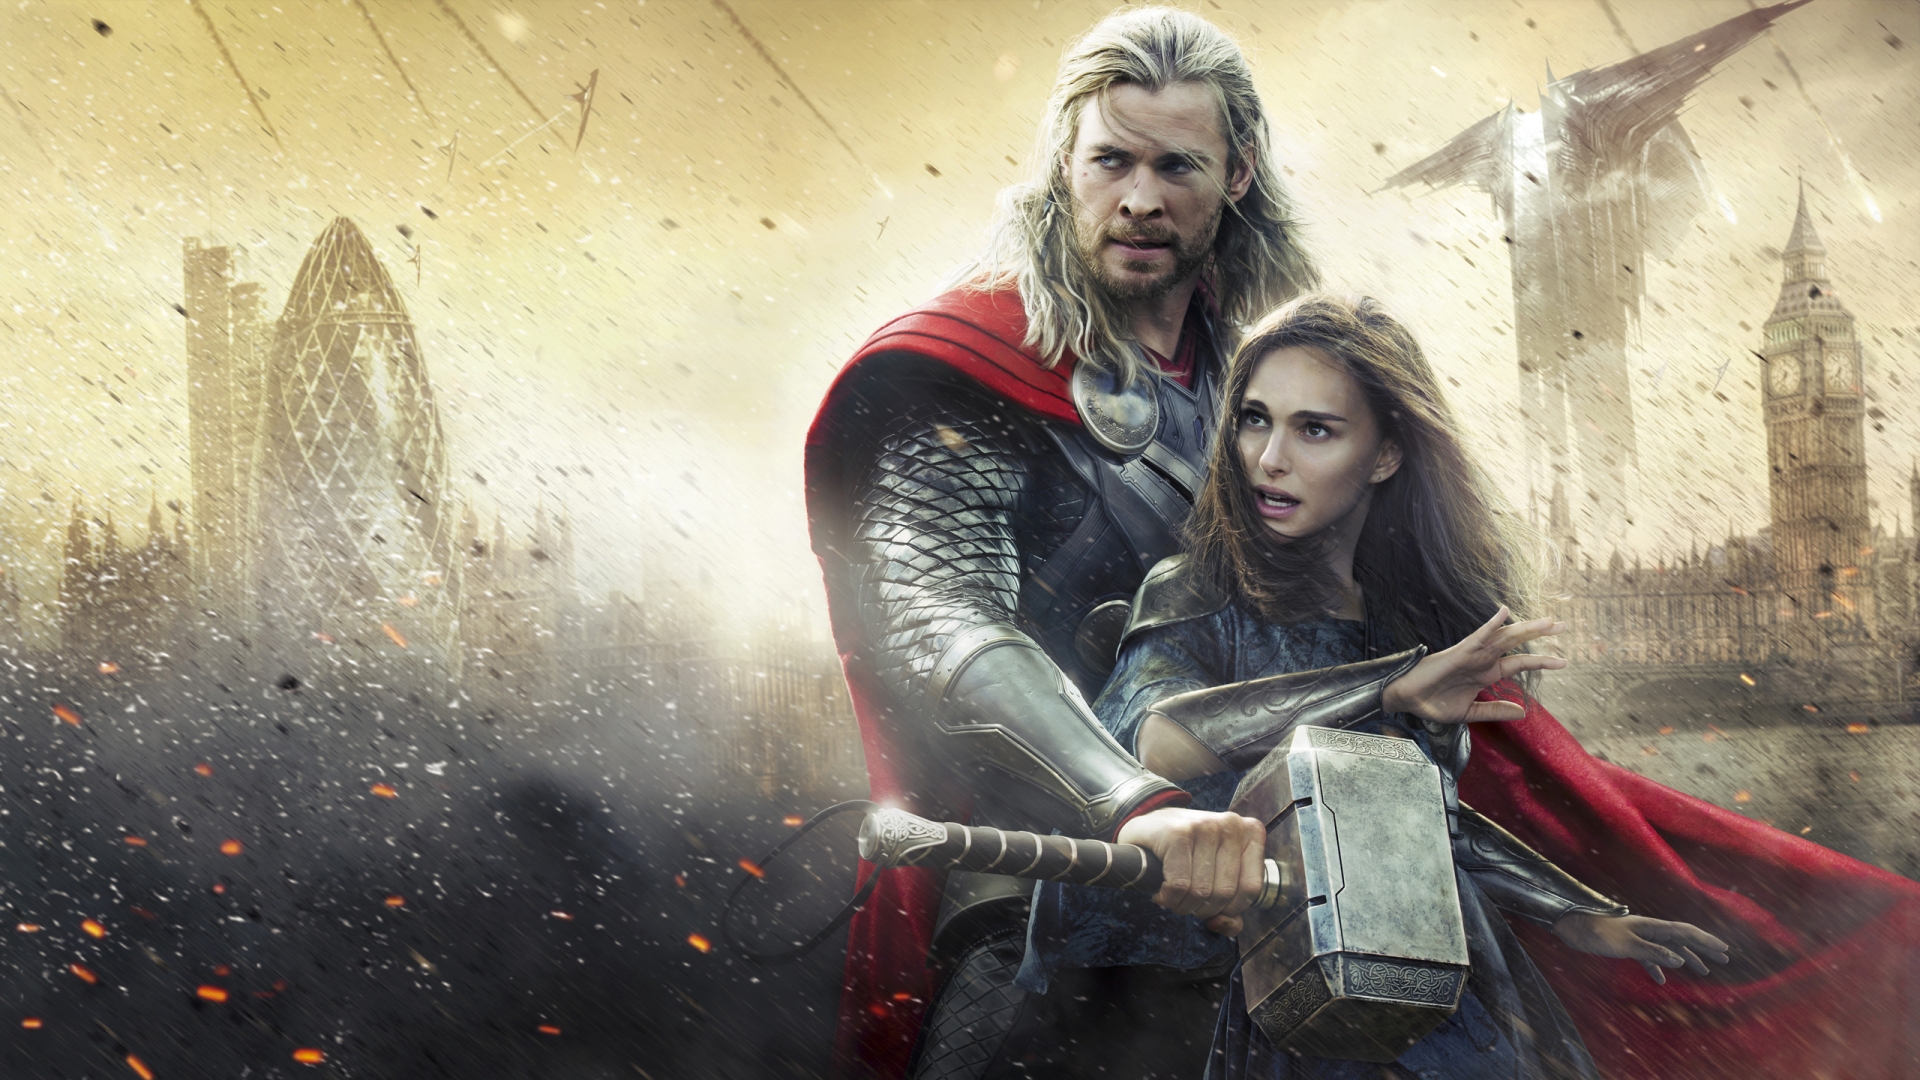 Thor Movie: Thor and Jane Foster for 1920 x 1080 HDTV 1080p resolution